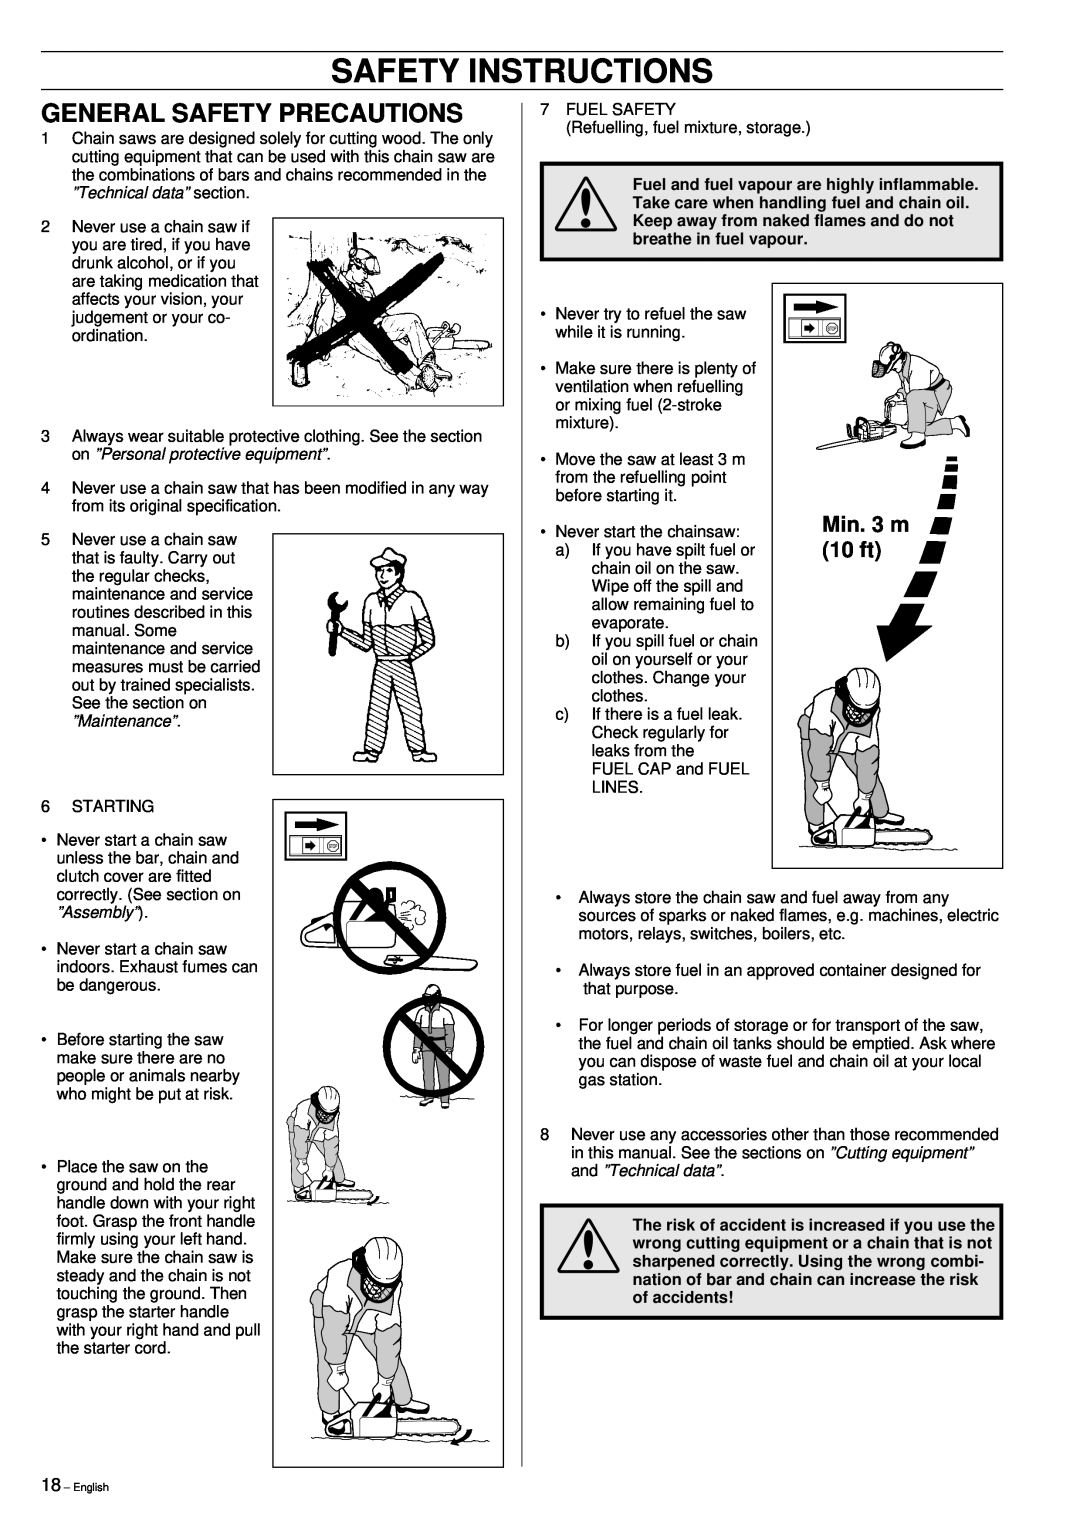 Husqvarna 51 manual Safety Instructions, Min. 3 m, 10 ft, ”Technical data” section, on ”Personal protective equipment” 